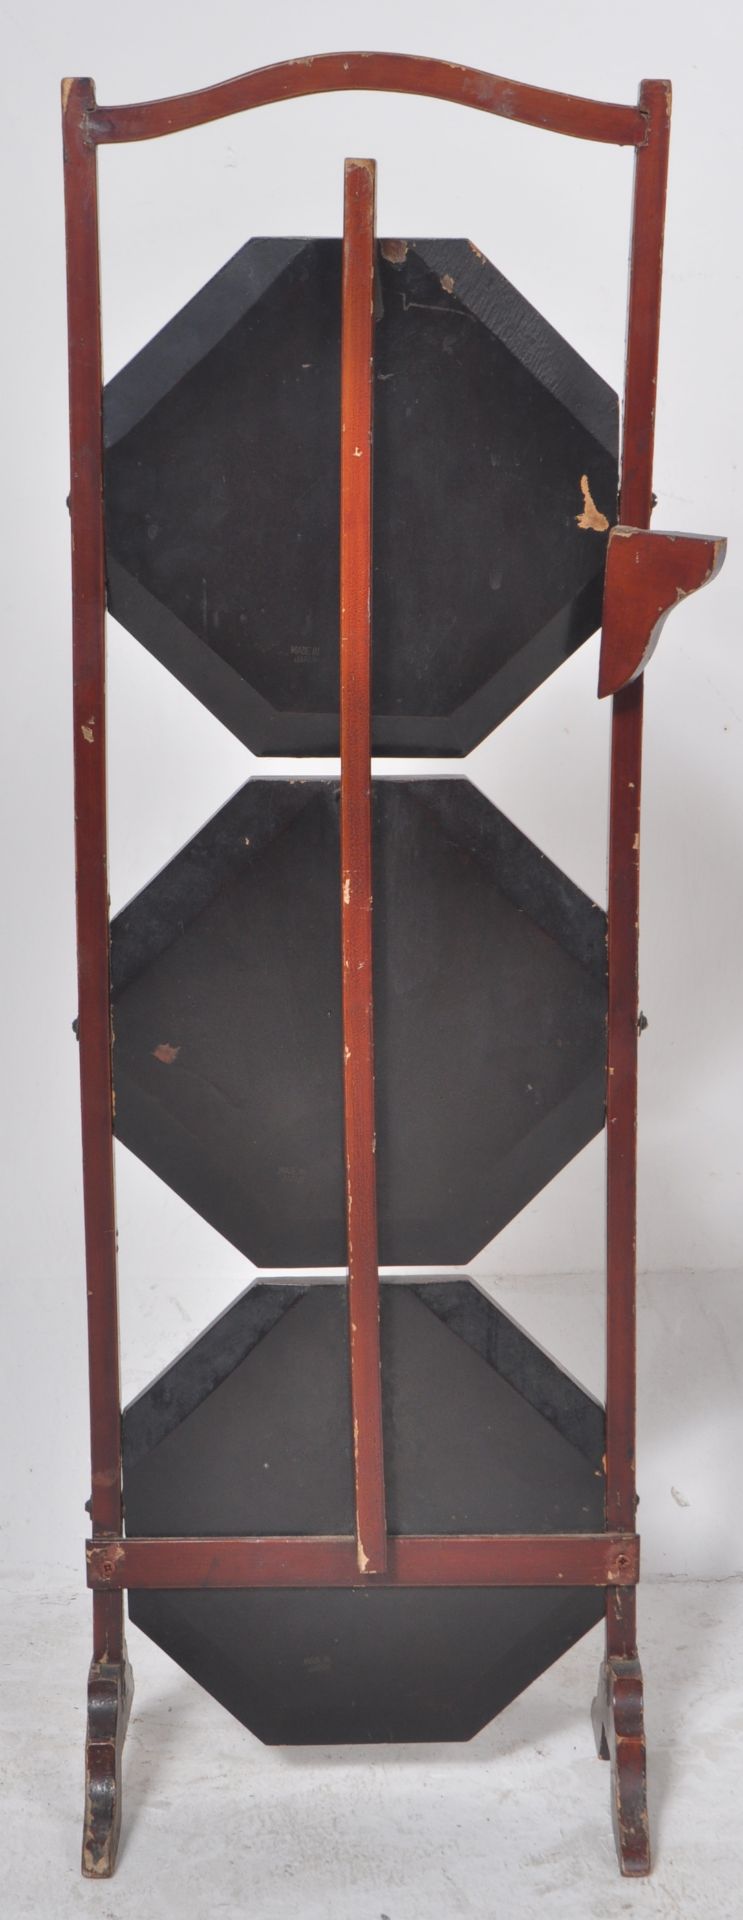 19TH CENTURY CHINESE THREE TIER CAKE / PLATE STAND - Image 8 of 8